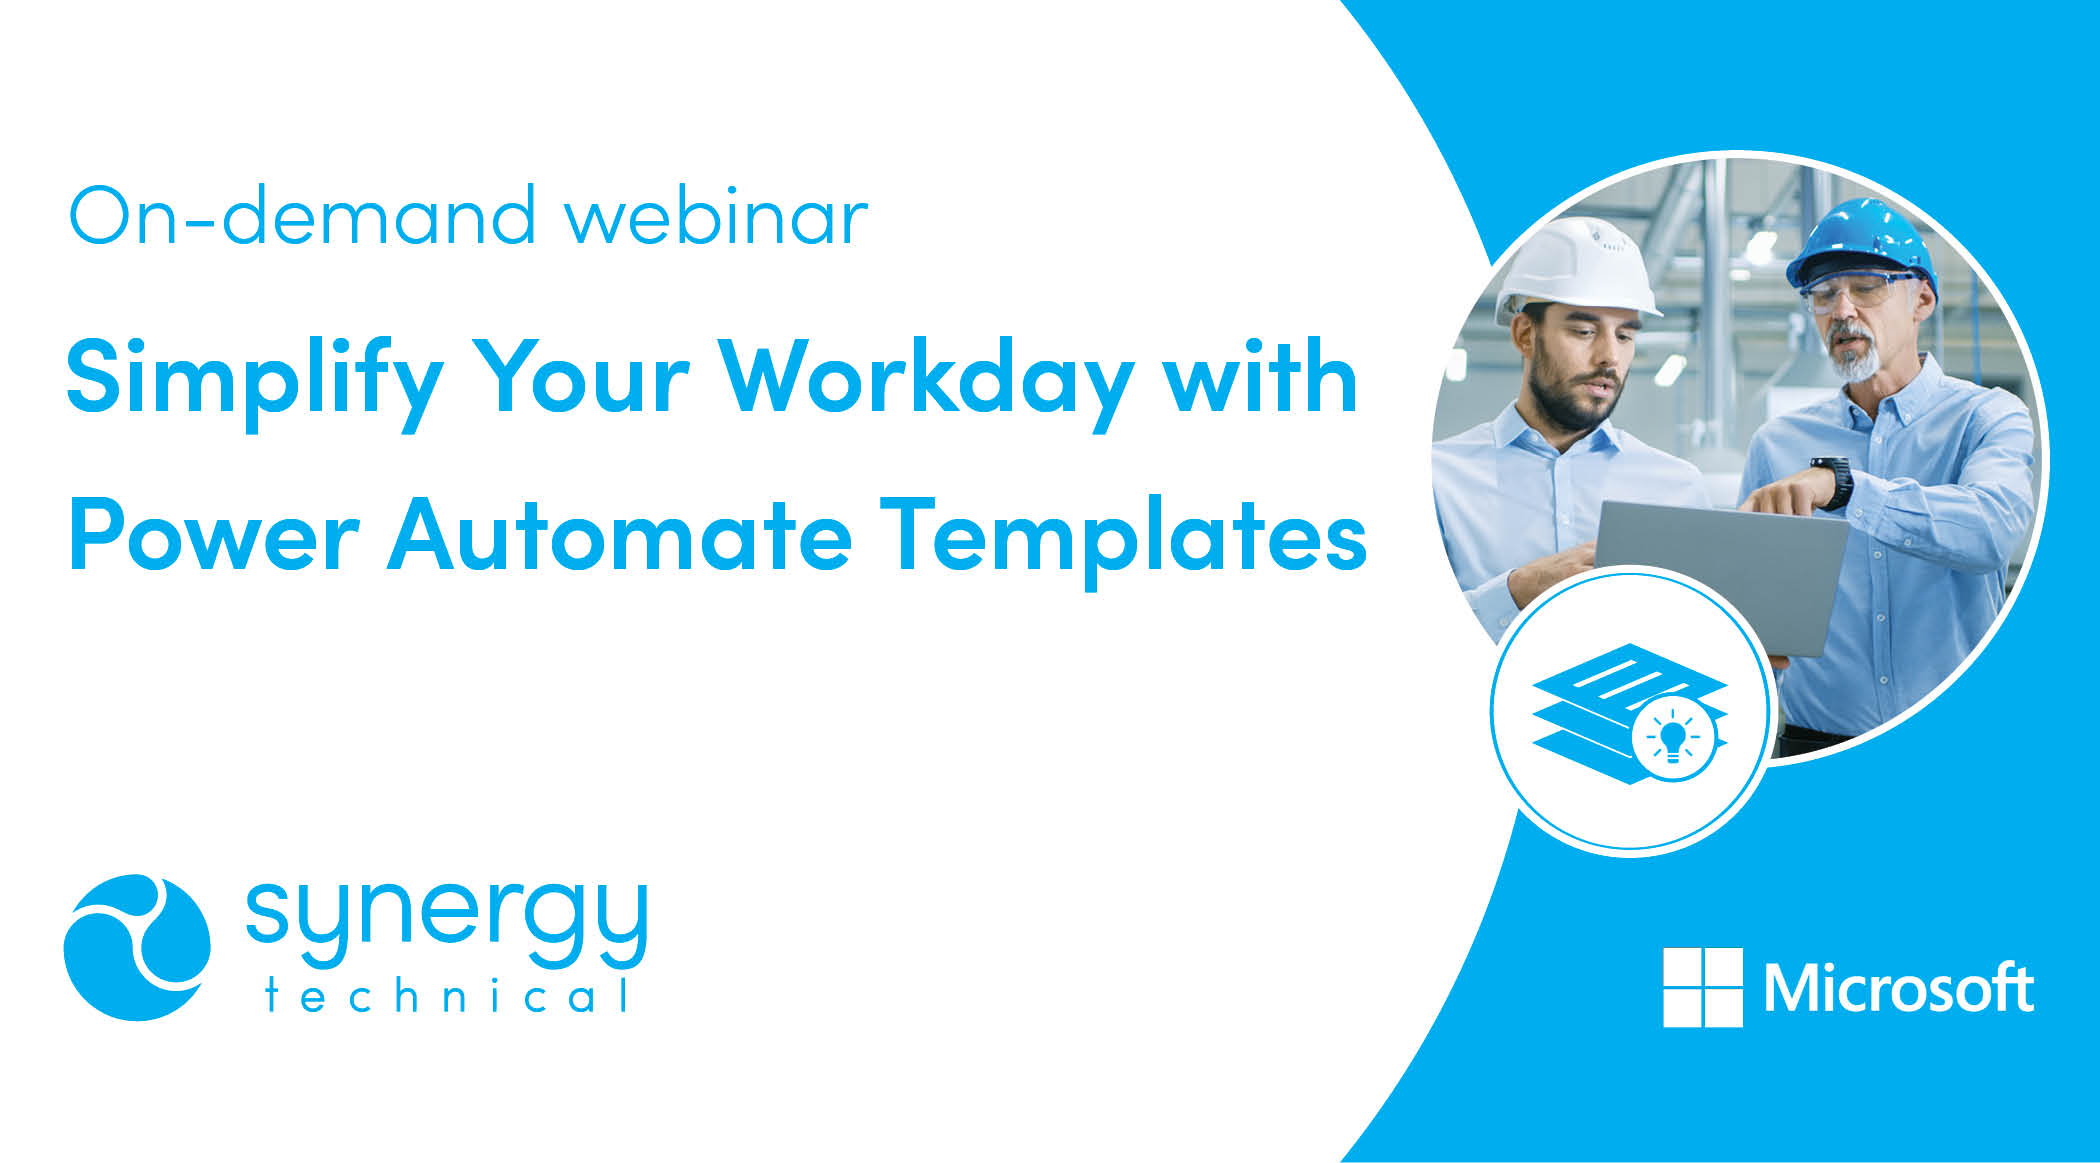 Simplify Your Workday With Power Automate Templates